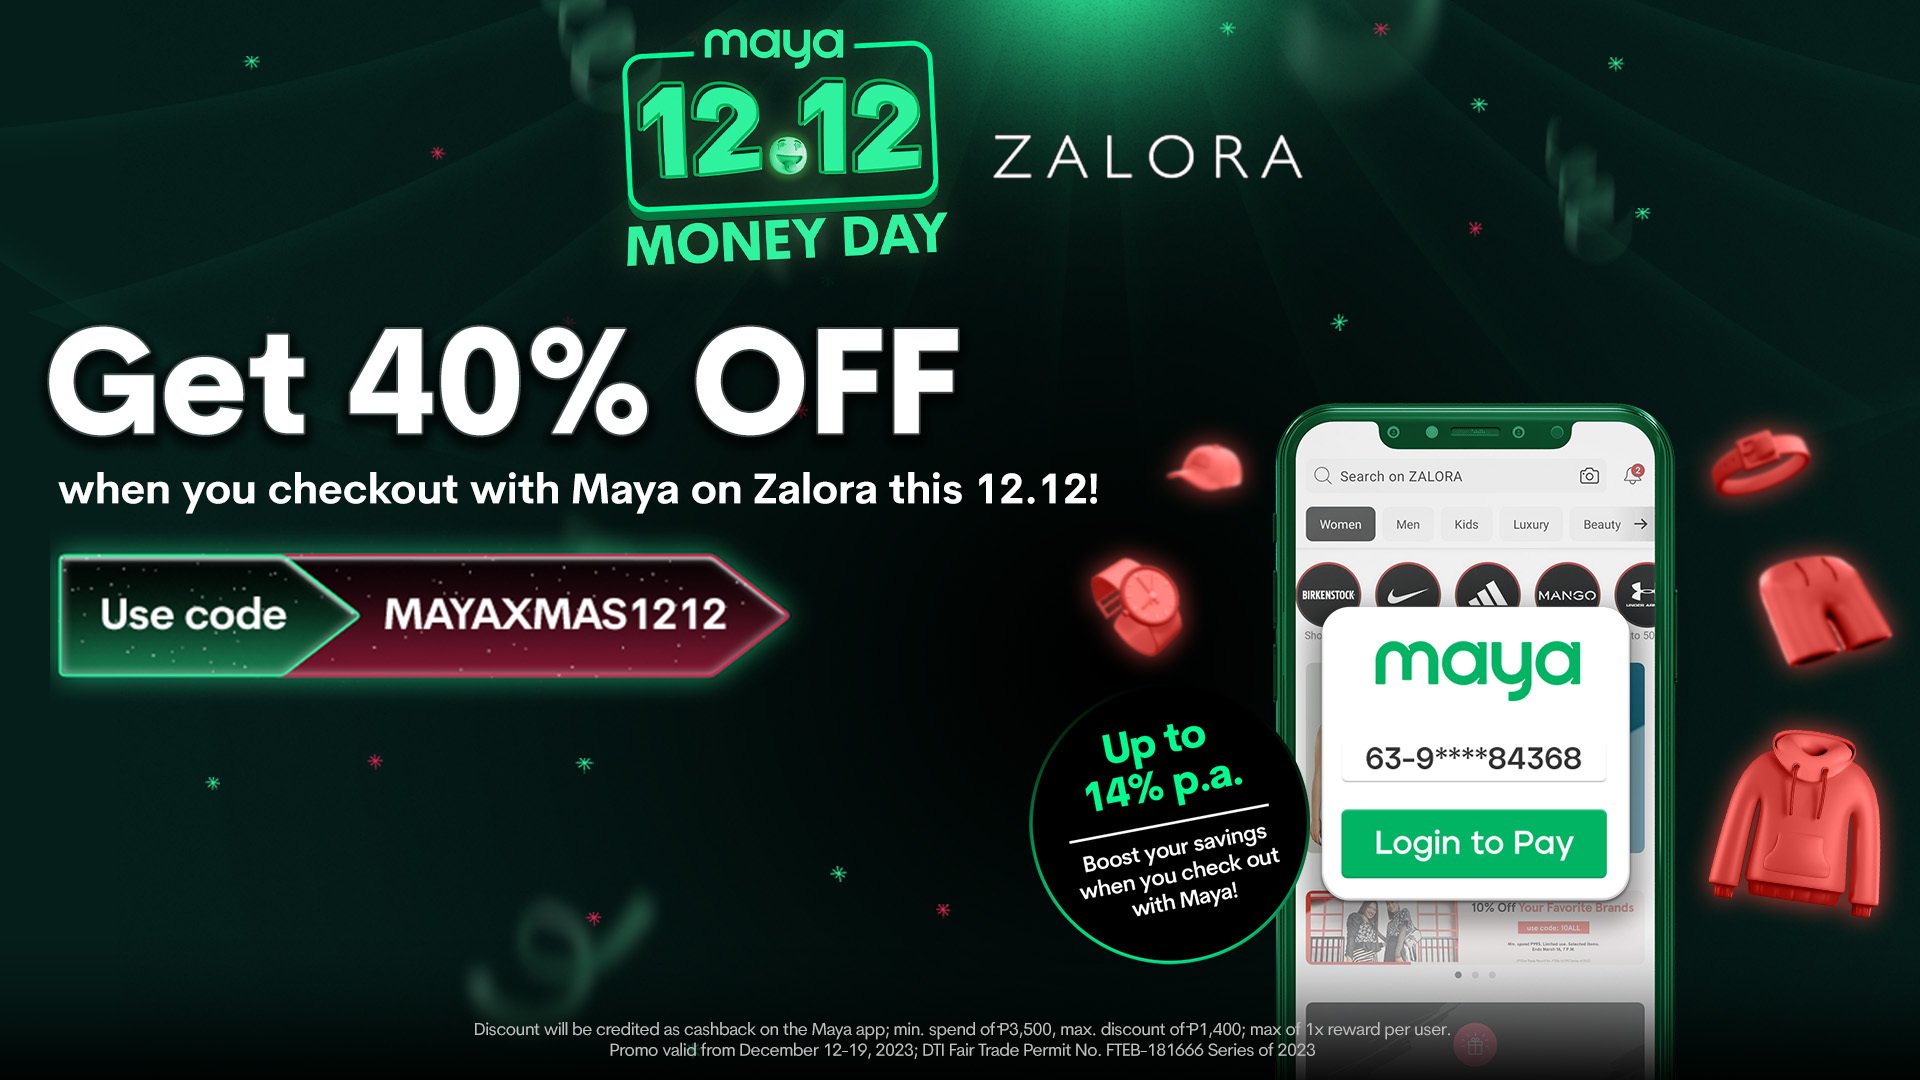 Get 40% off on Zalora when you pay with Maya this 12.12 sale!